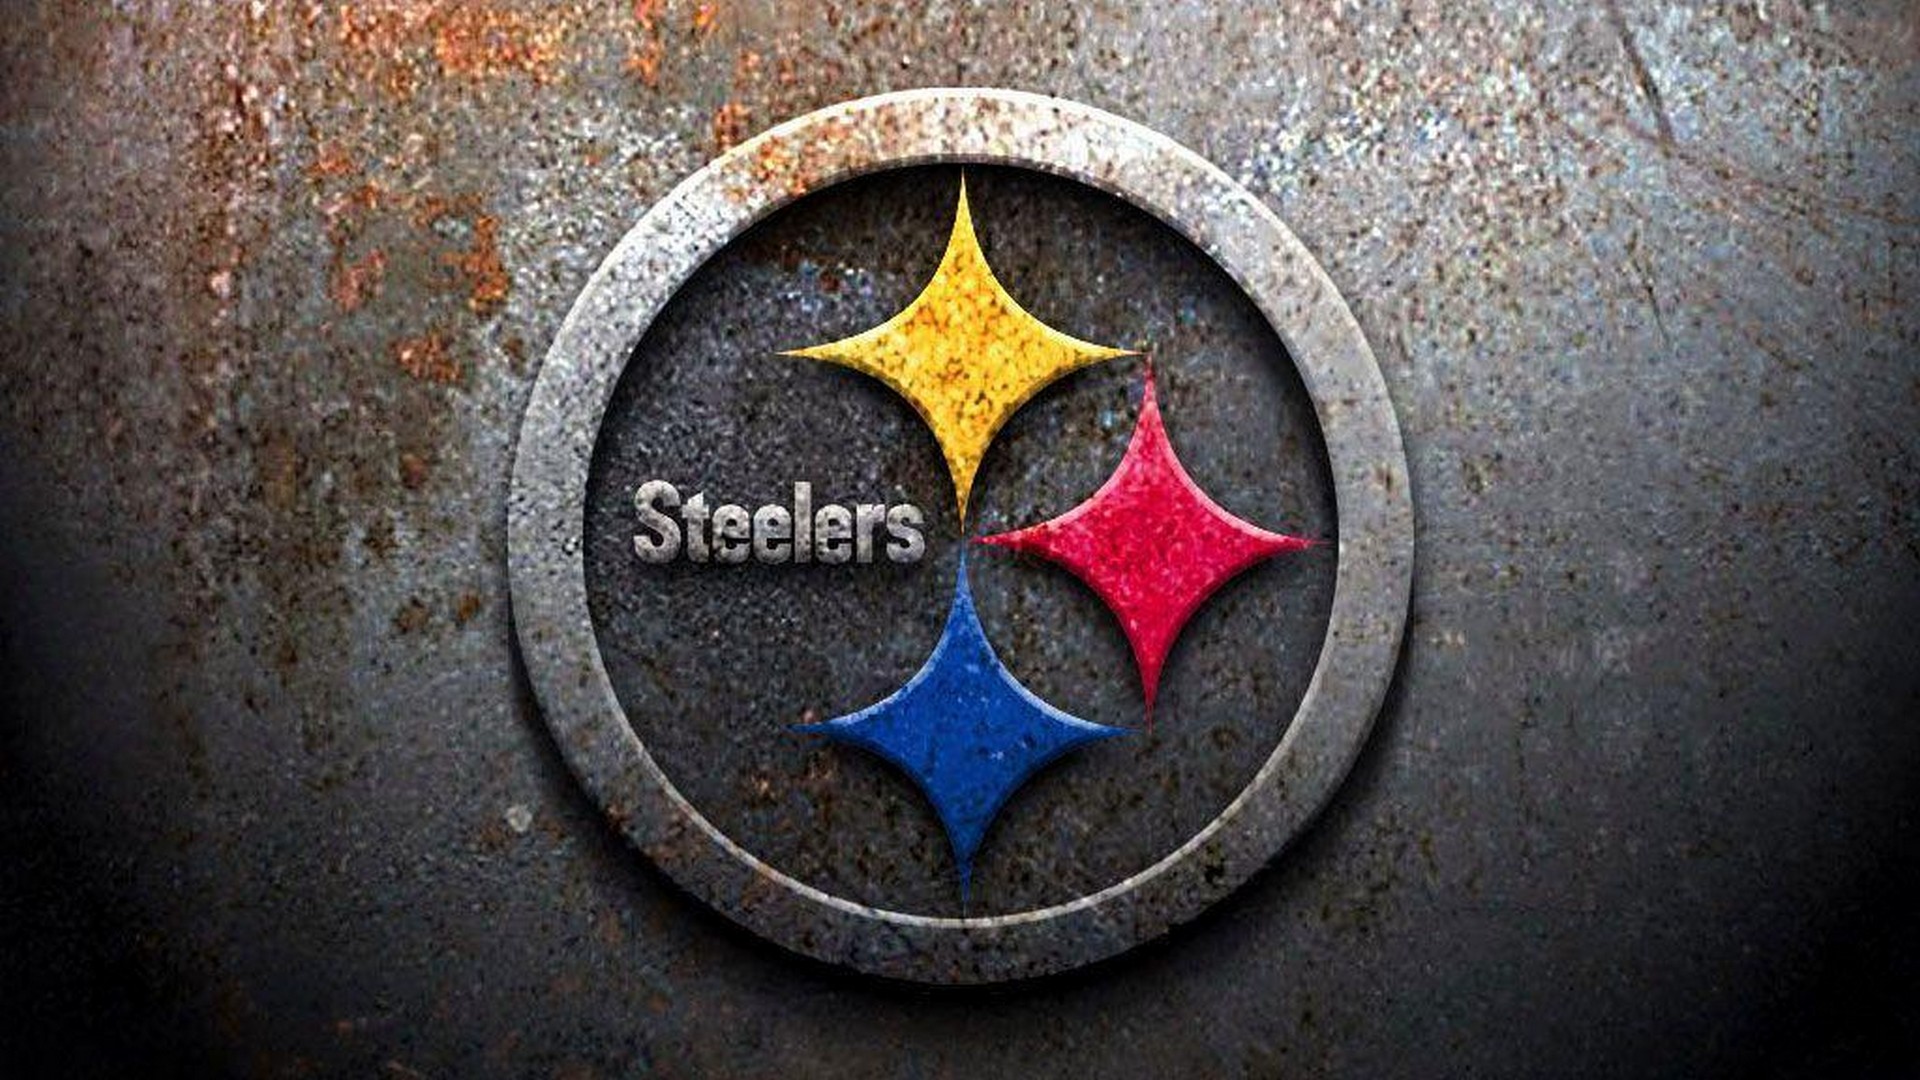 Wallpaper Desktop Steelers Logo HD with resolution 1920x1080 pixel. You can make this wallpaper for your Mac or Windows Desktop Background, iPhone, Android or Tablet and another Smartphone device